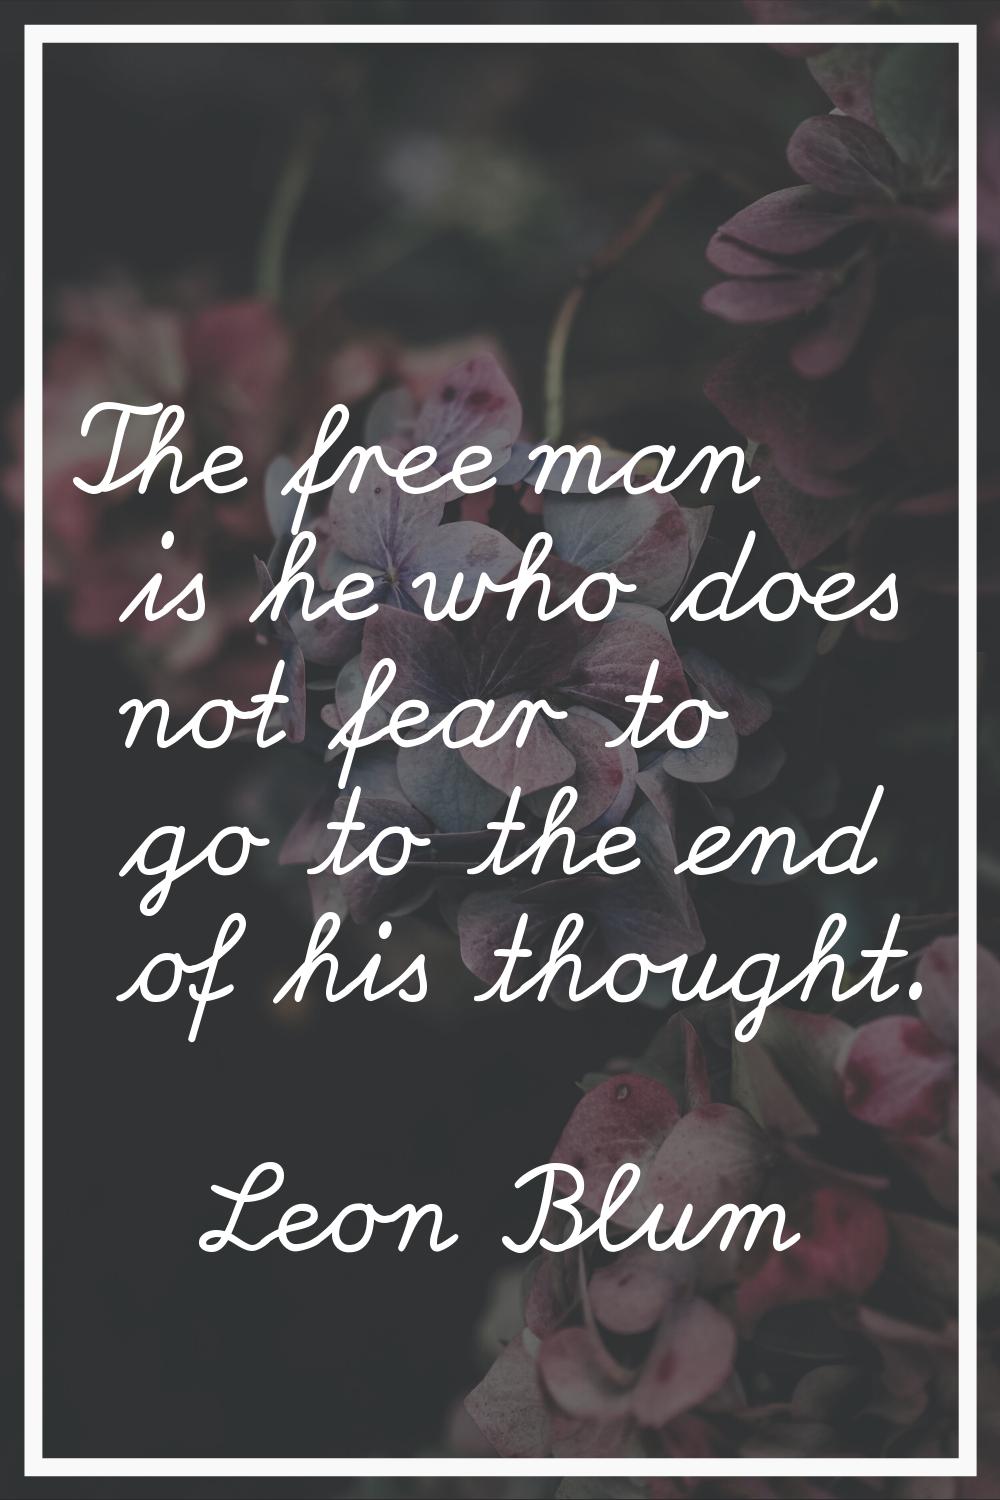 The free man is he who does not fear to go to the end of his thought.